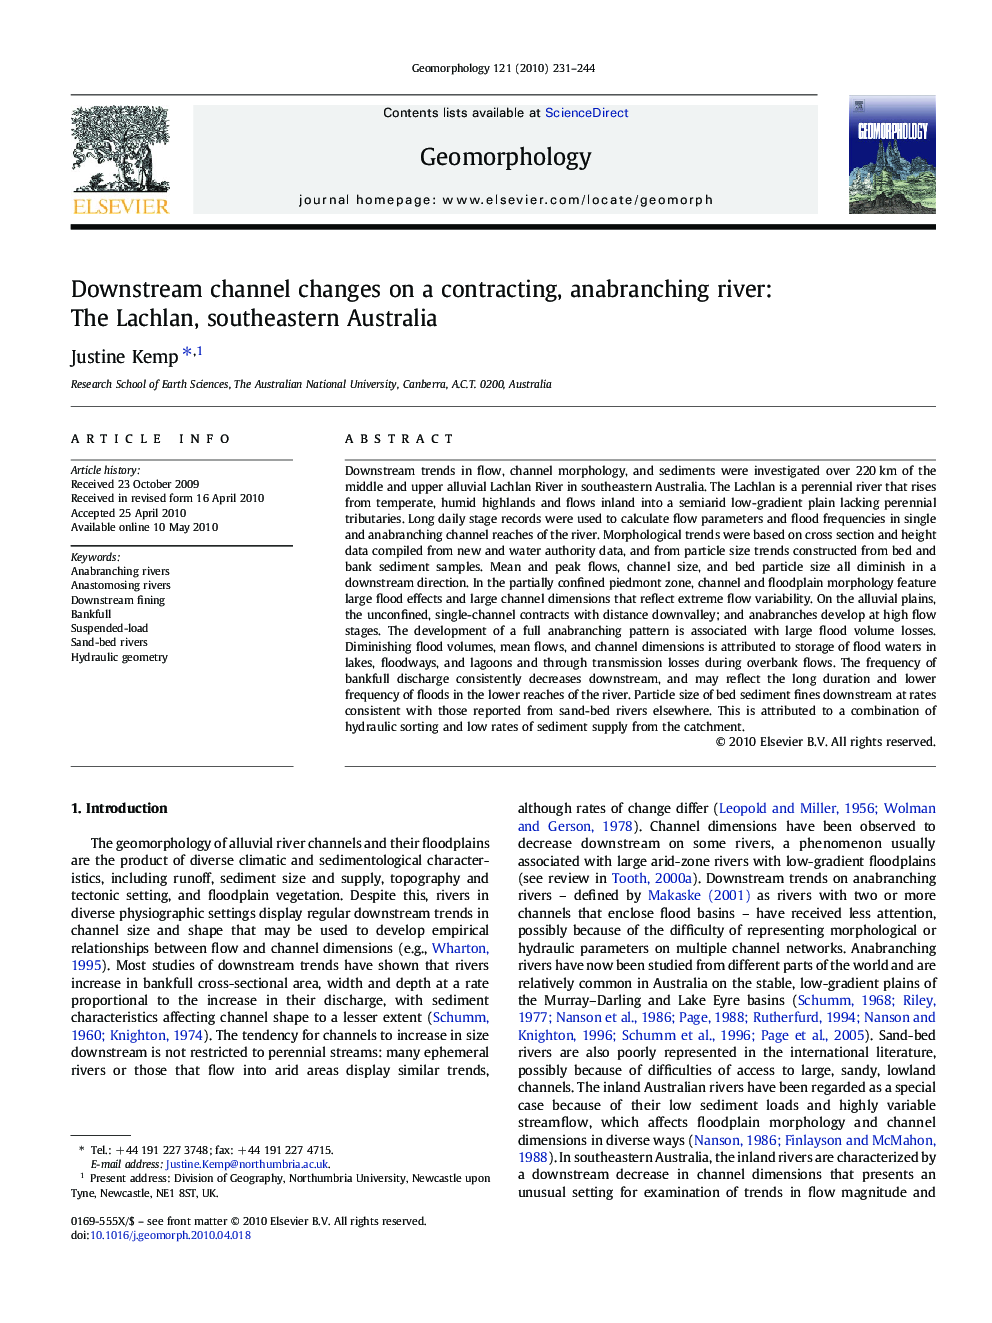 Downstream channel changes on a contracting, anabranching river: The Lachlan, southeastern Australia